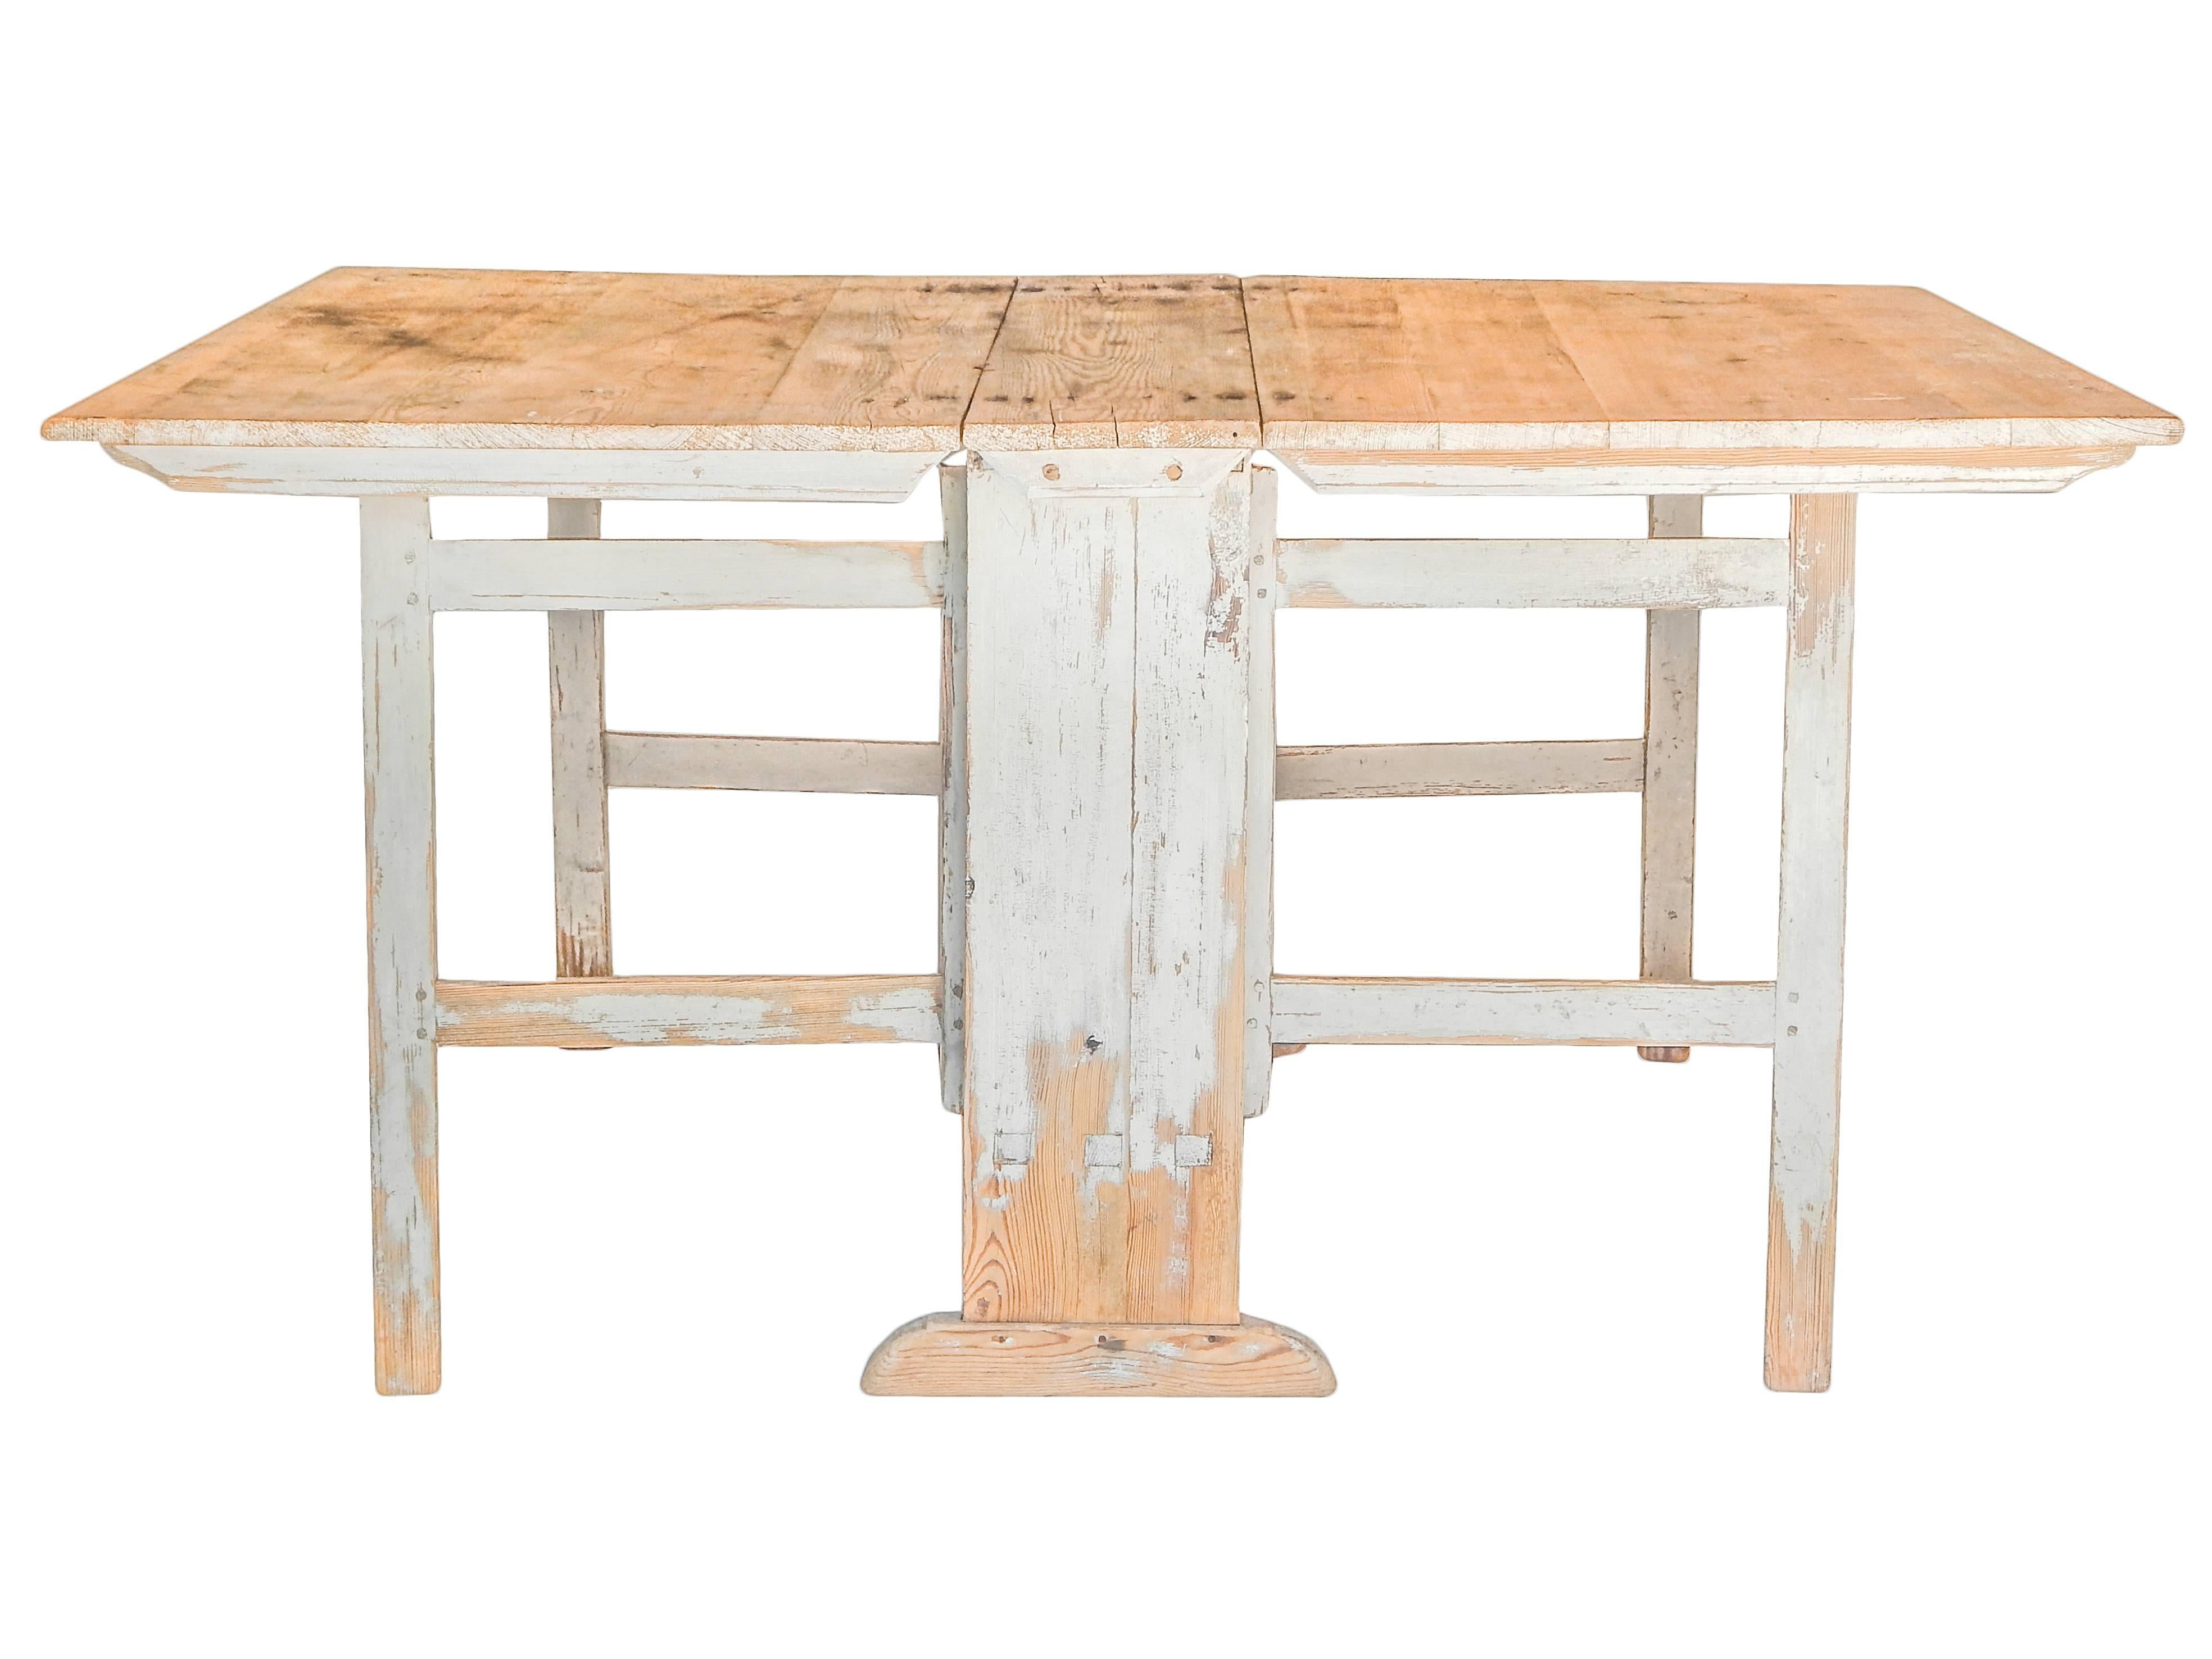 Drop leaf slagbord dining table from Sweden.
Depth when closed: 14 1/2